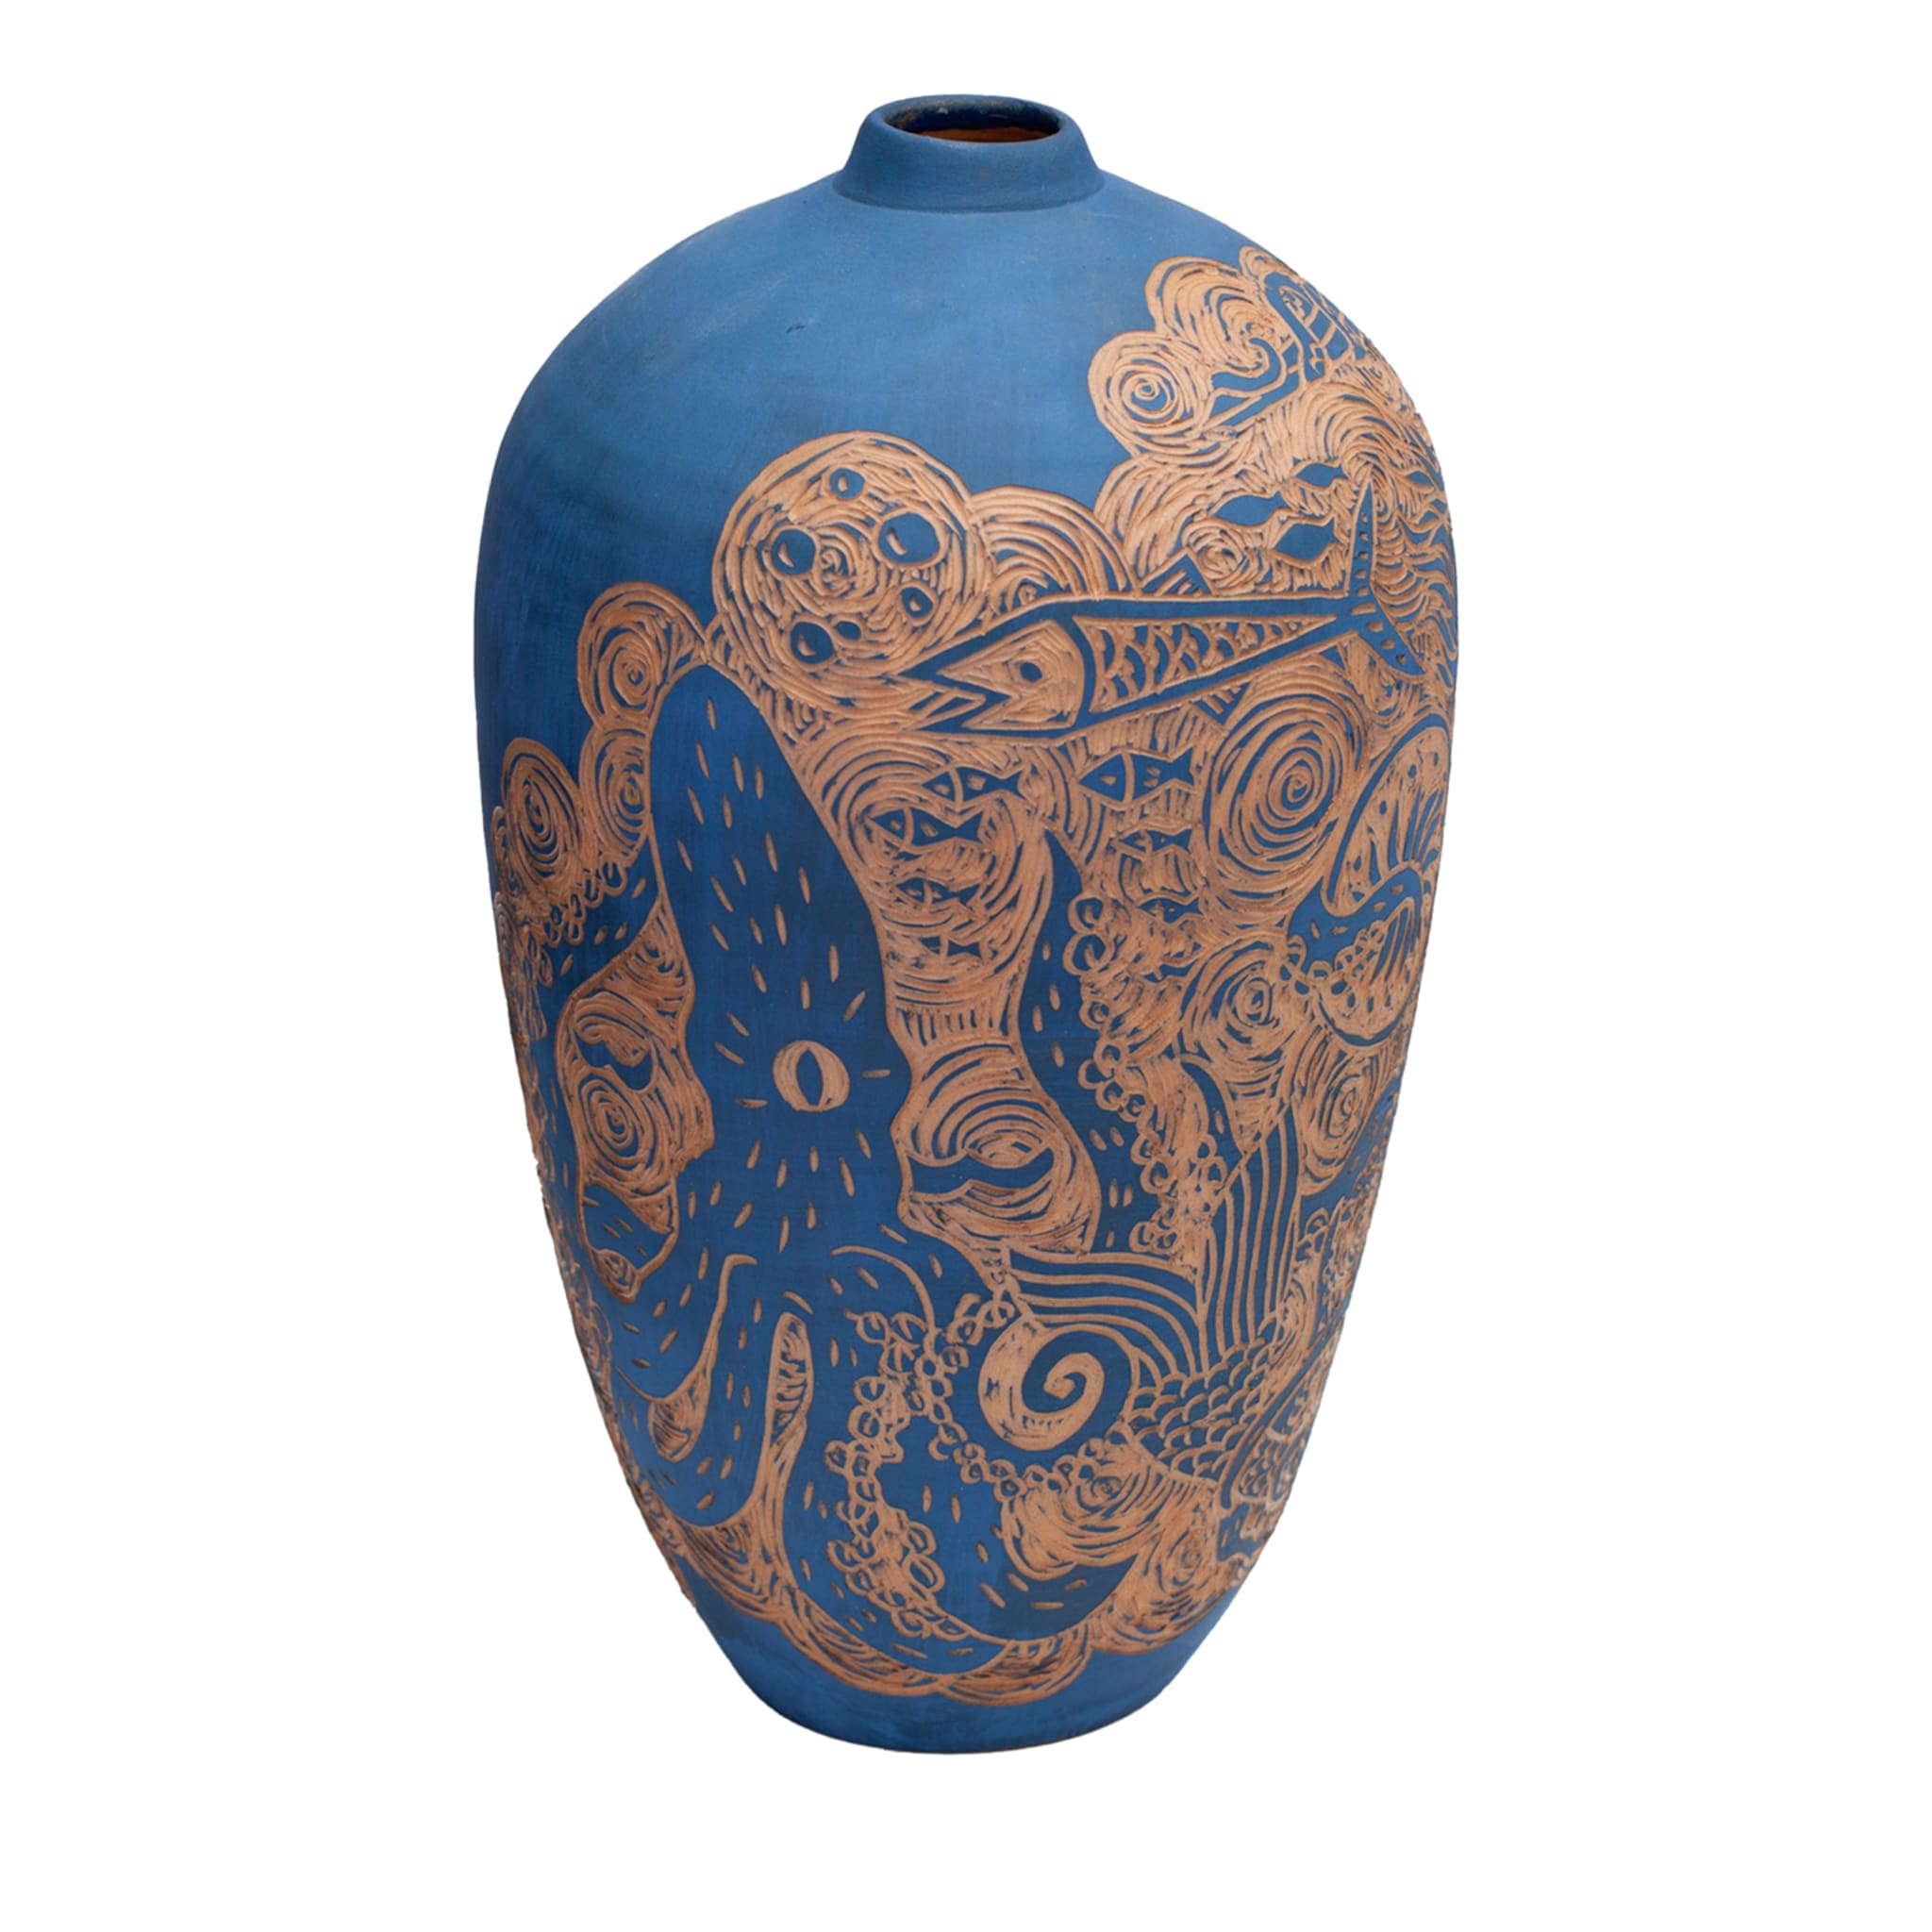 La Sirena Guerriera Blue Vase by Clara Holt and Chiara Zoppei - Main view